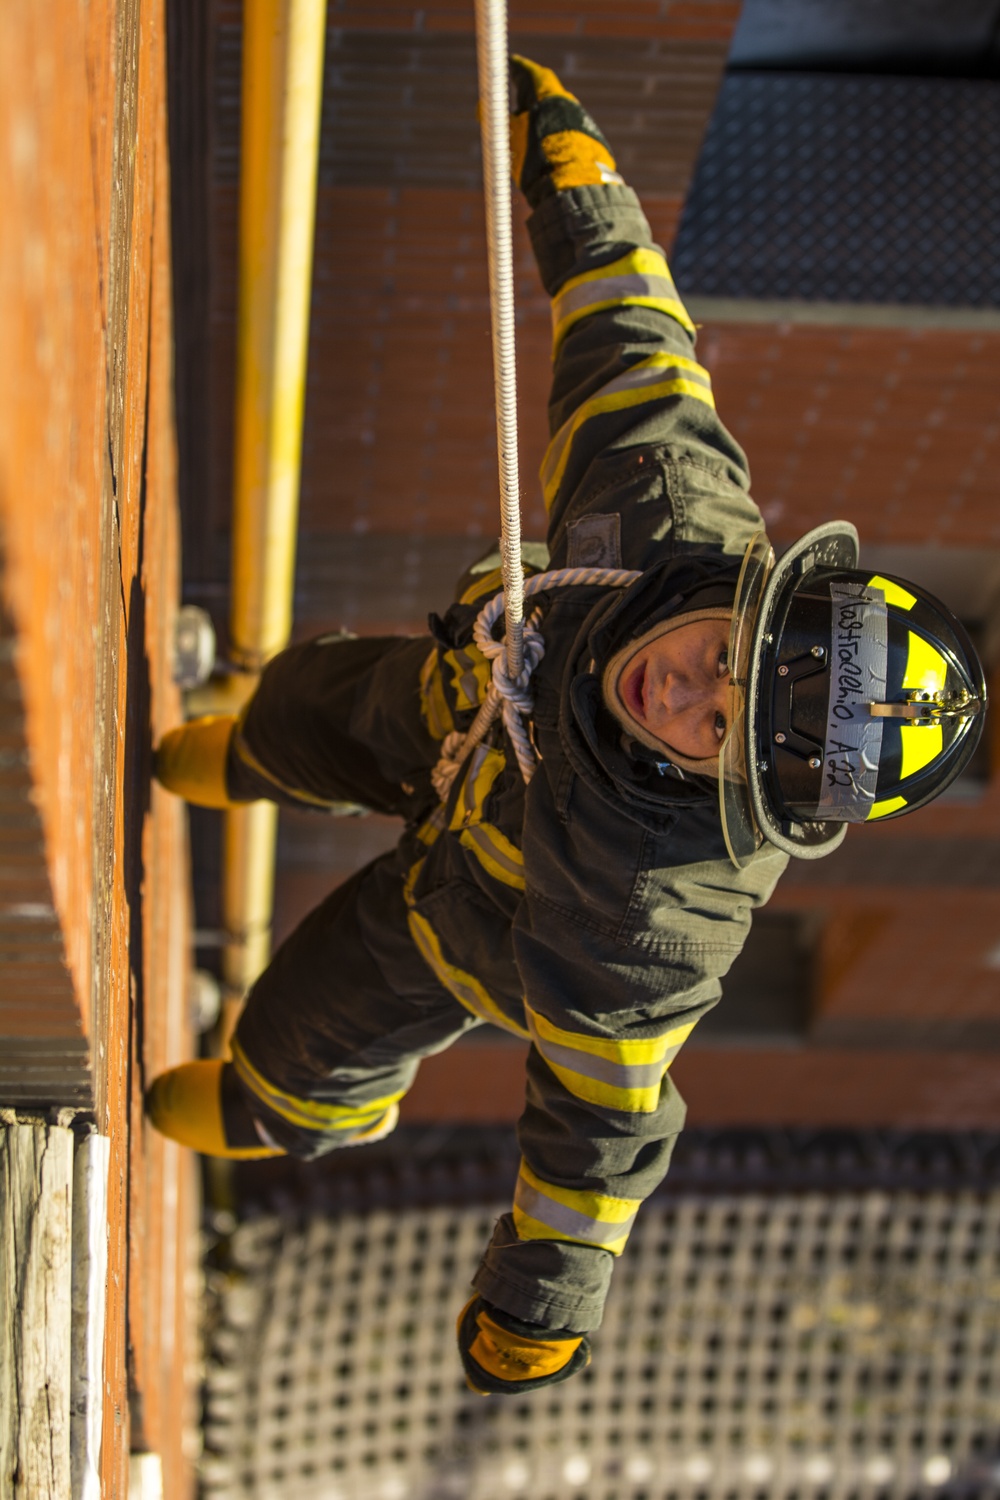 DVIDS - Images - Roof-rope-rescue [Image 21 of 21]